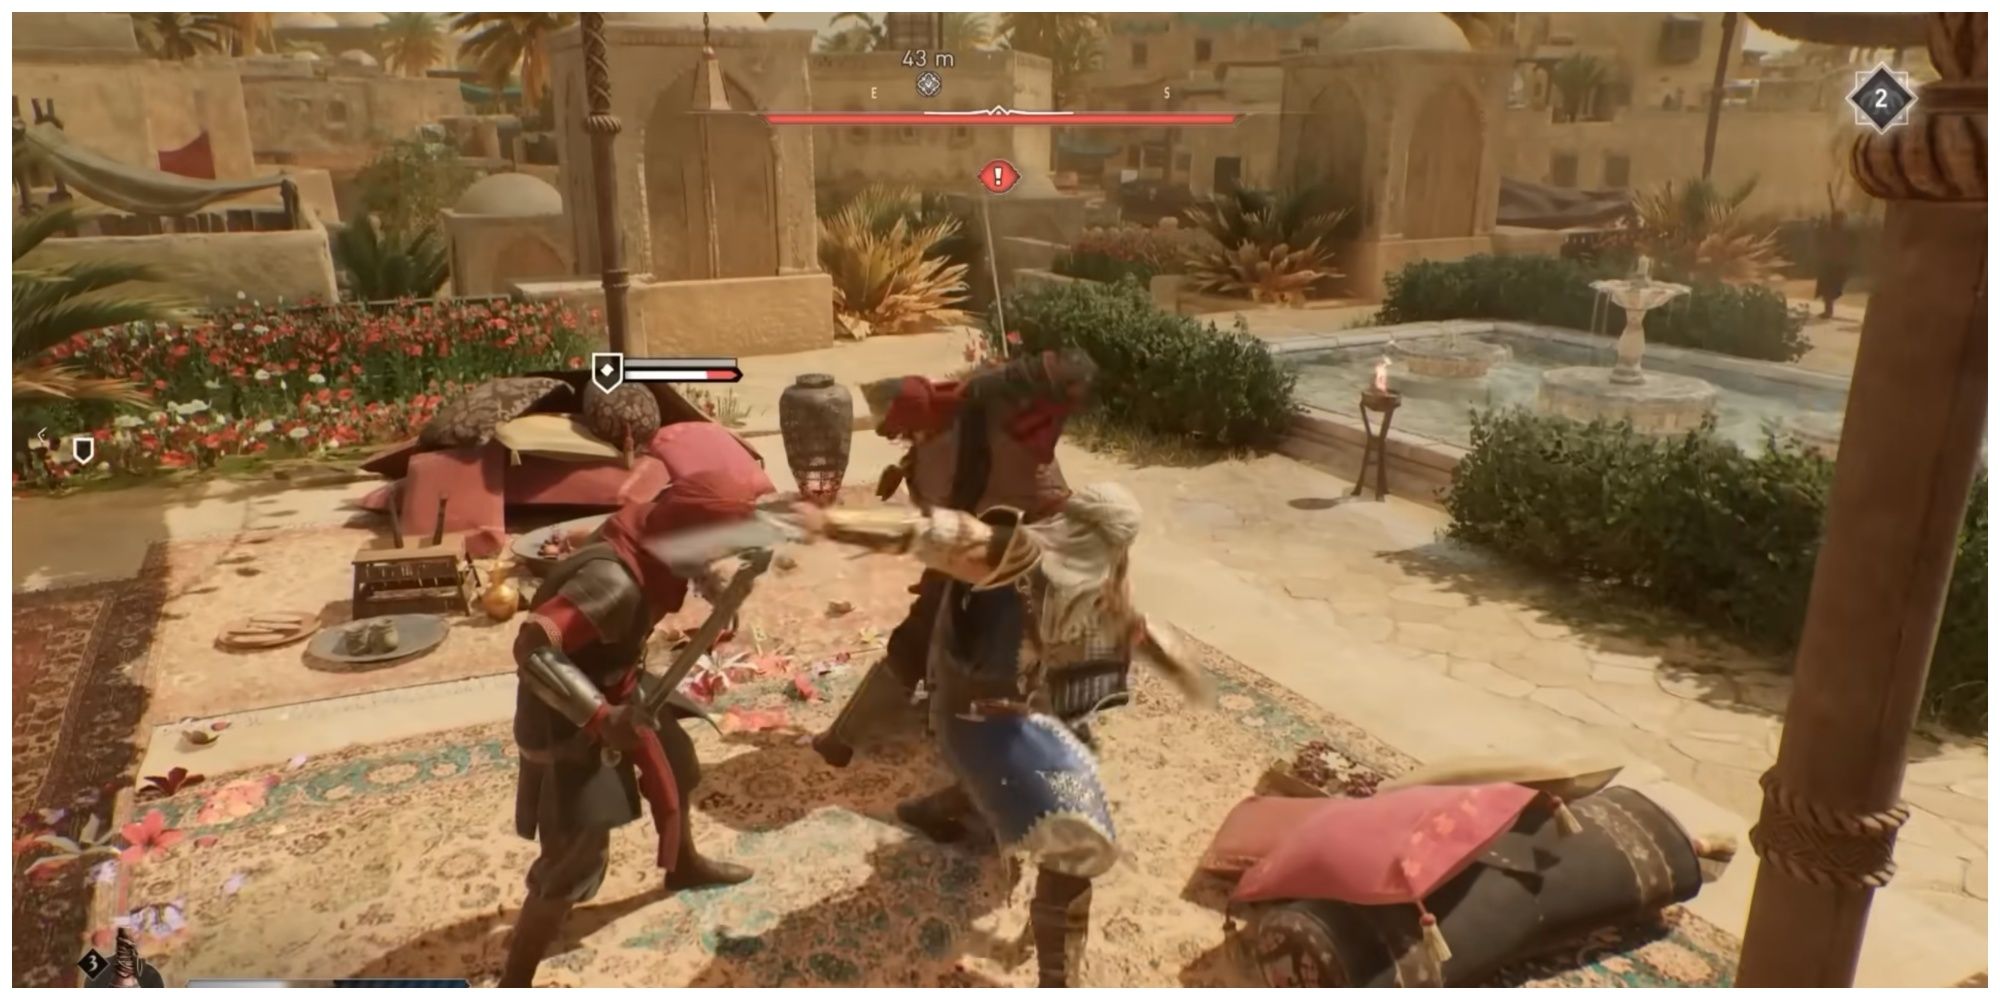 Defeating armored enemies in Assassin's Creed Mirage